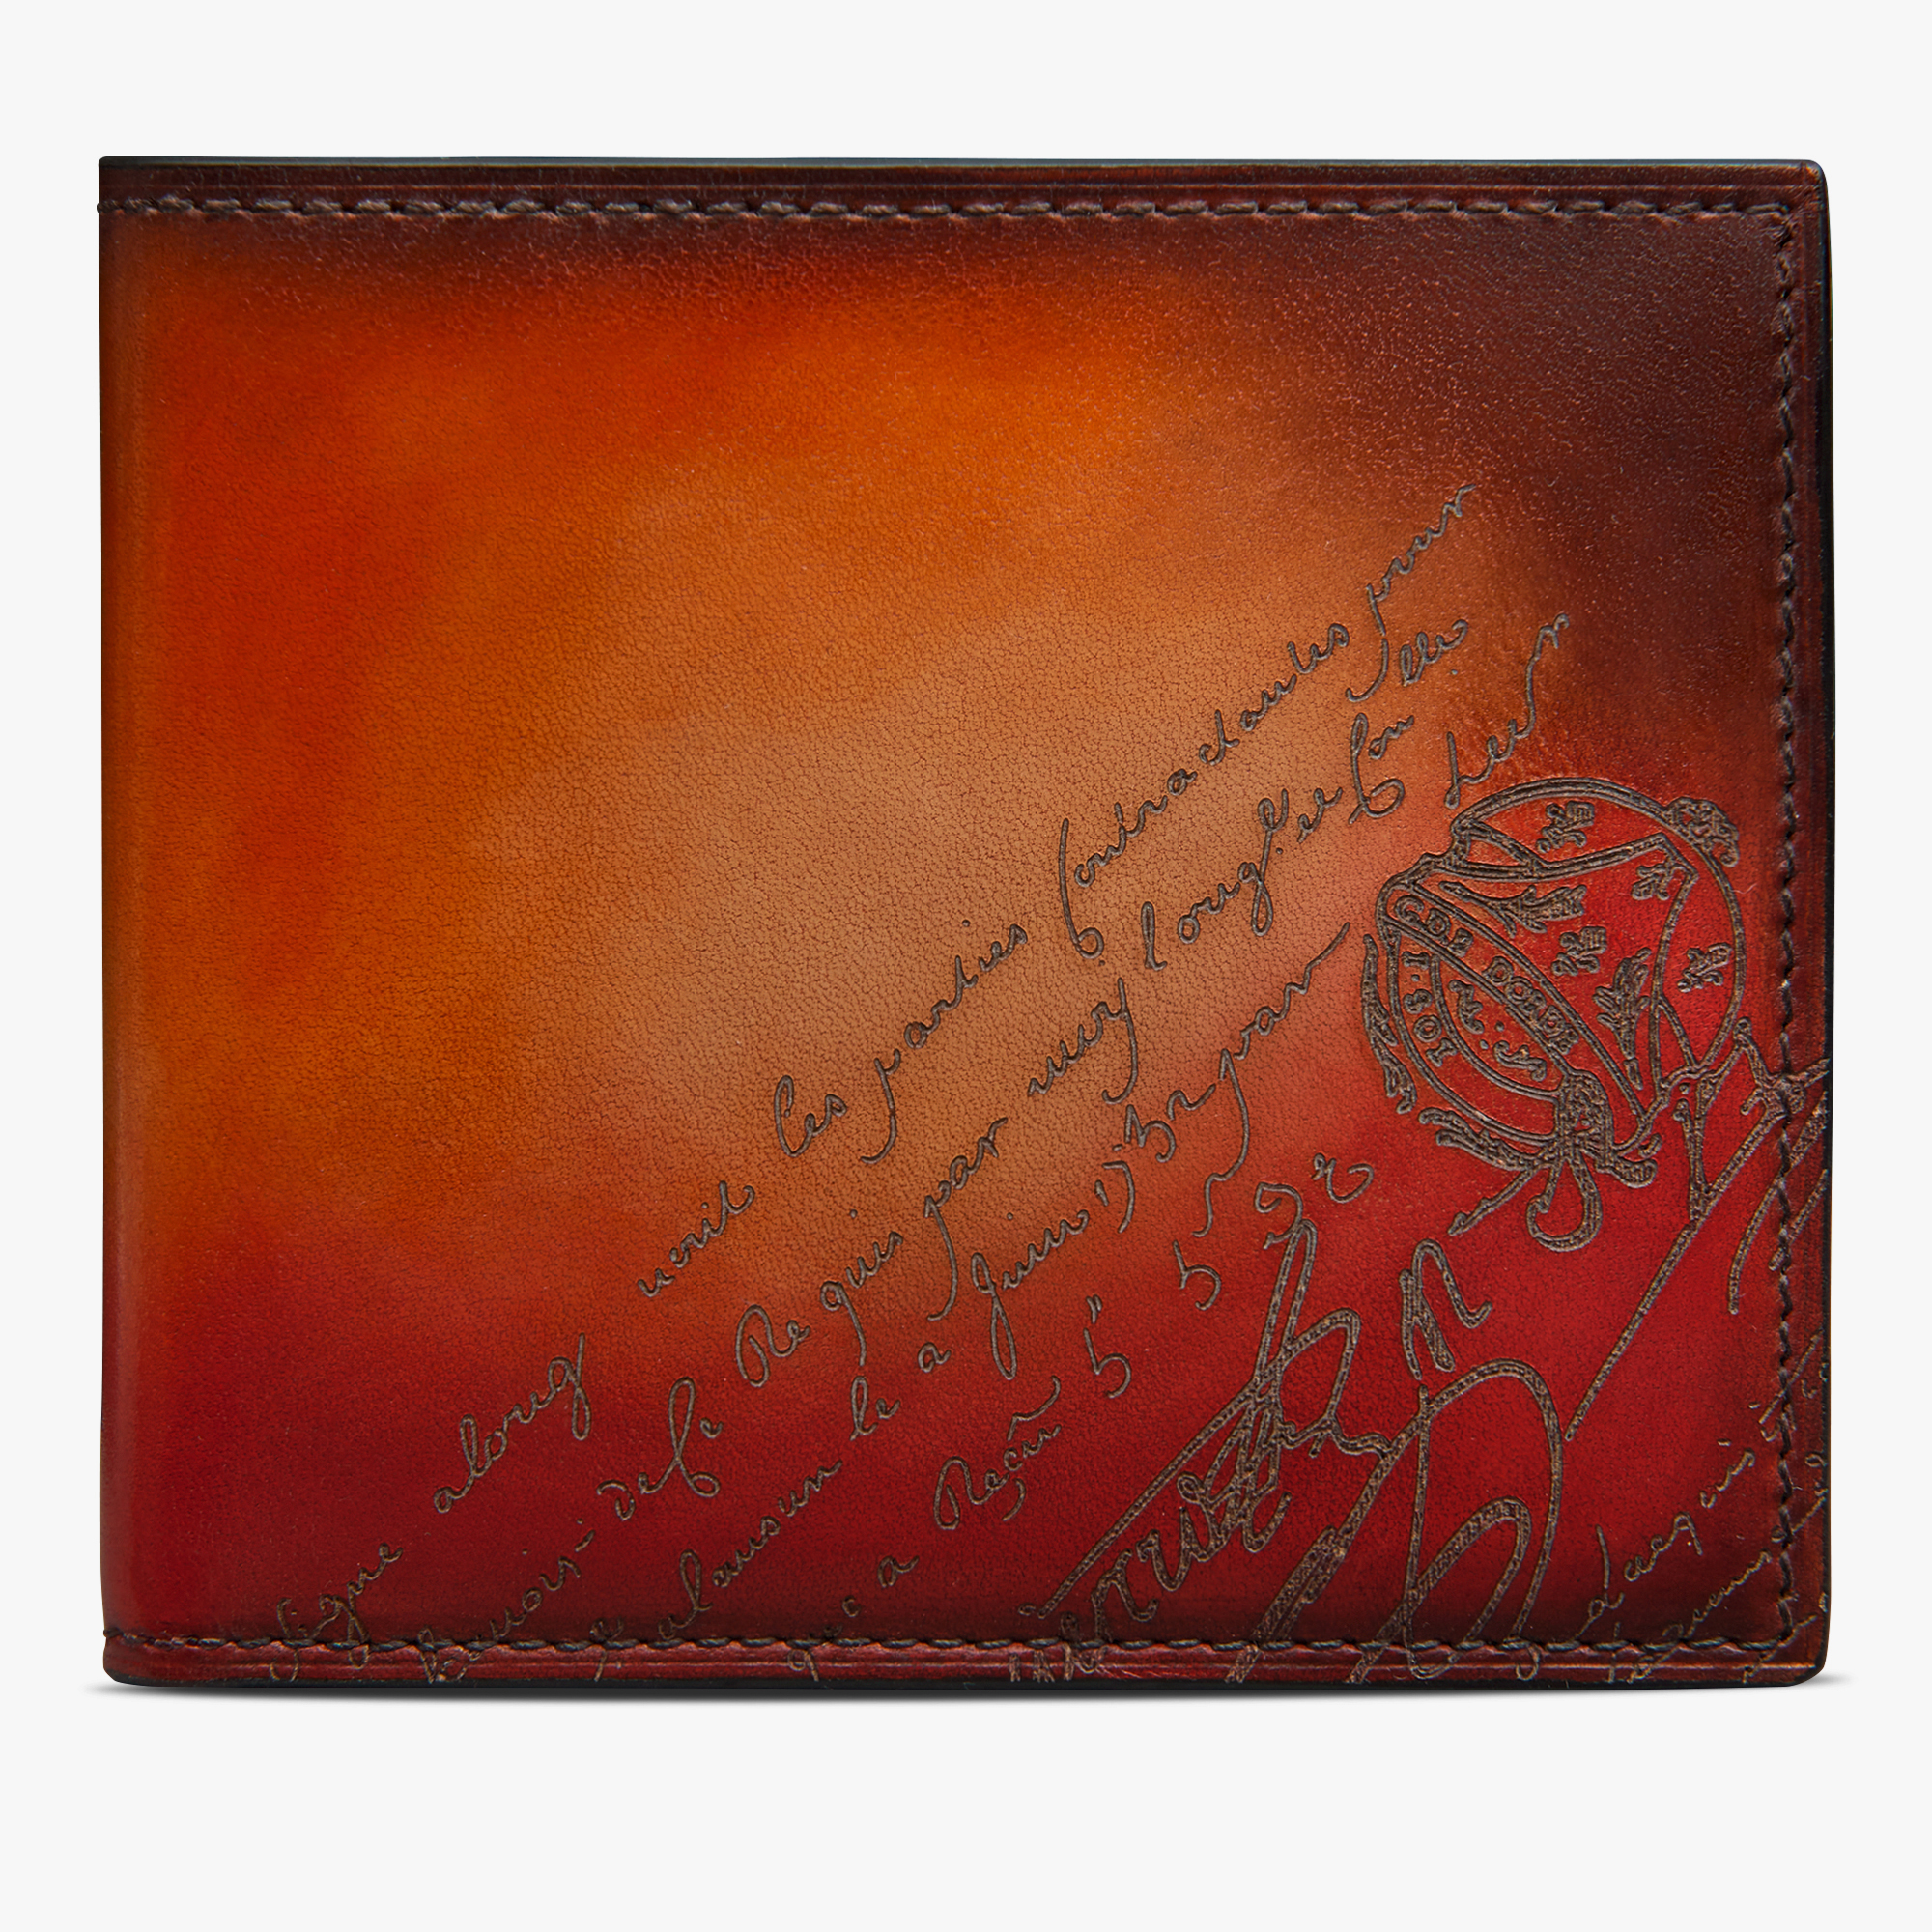 Makore Scritto Leather Wallet, RED SUNSET, hi-res